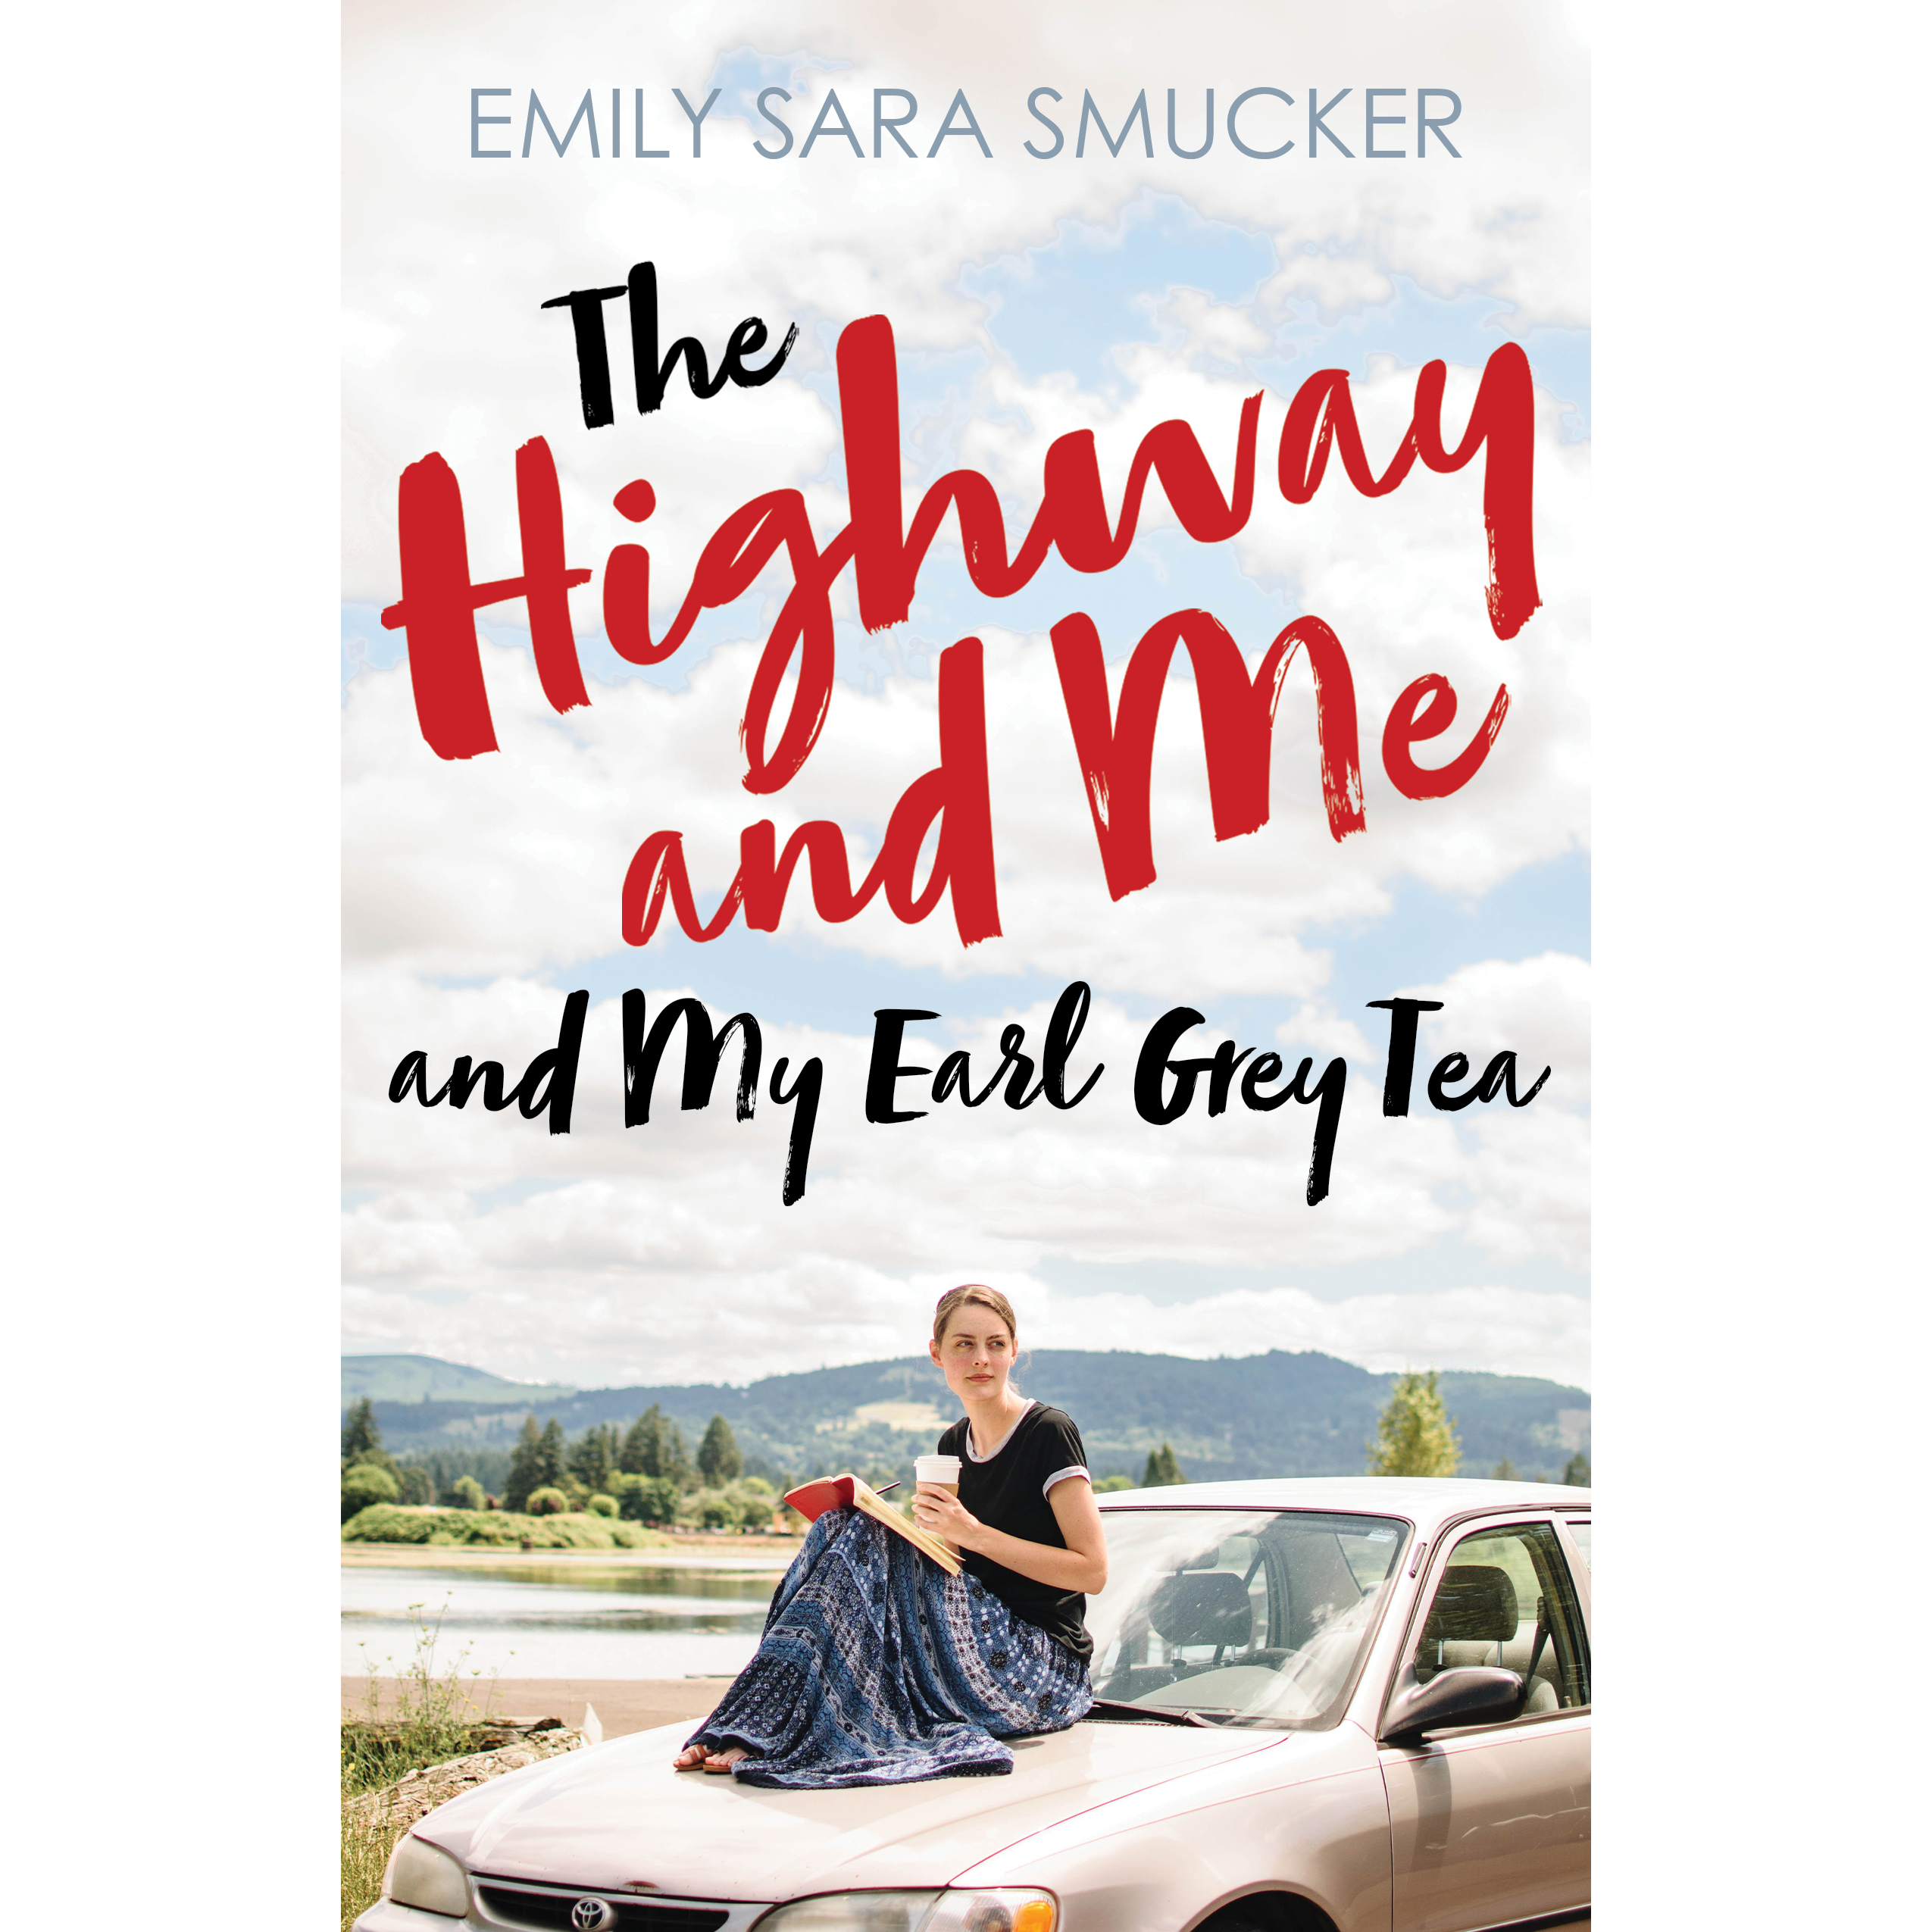 The Highway and Me and My Earl Grey Tea